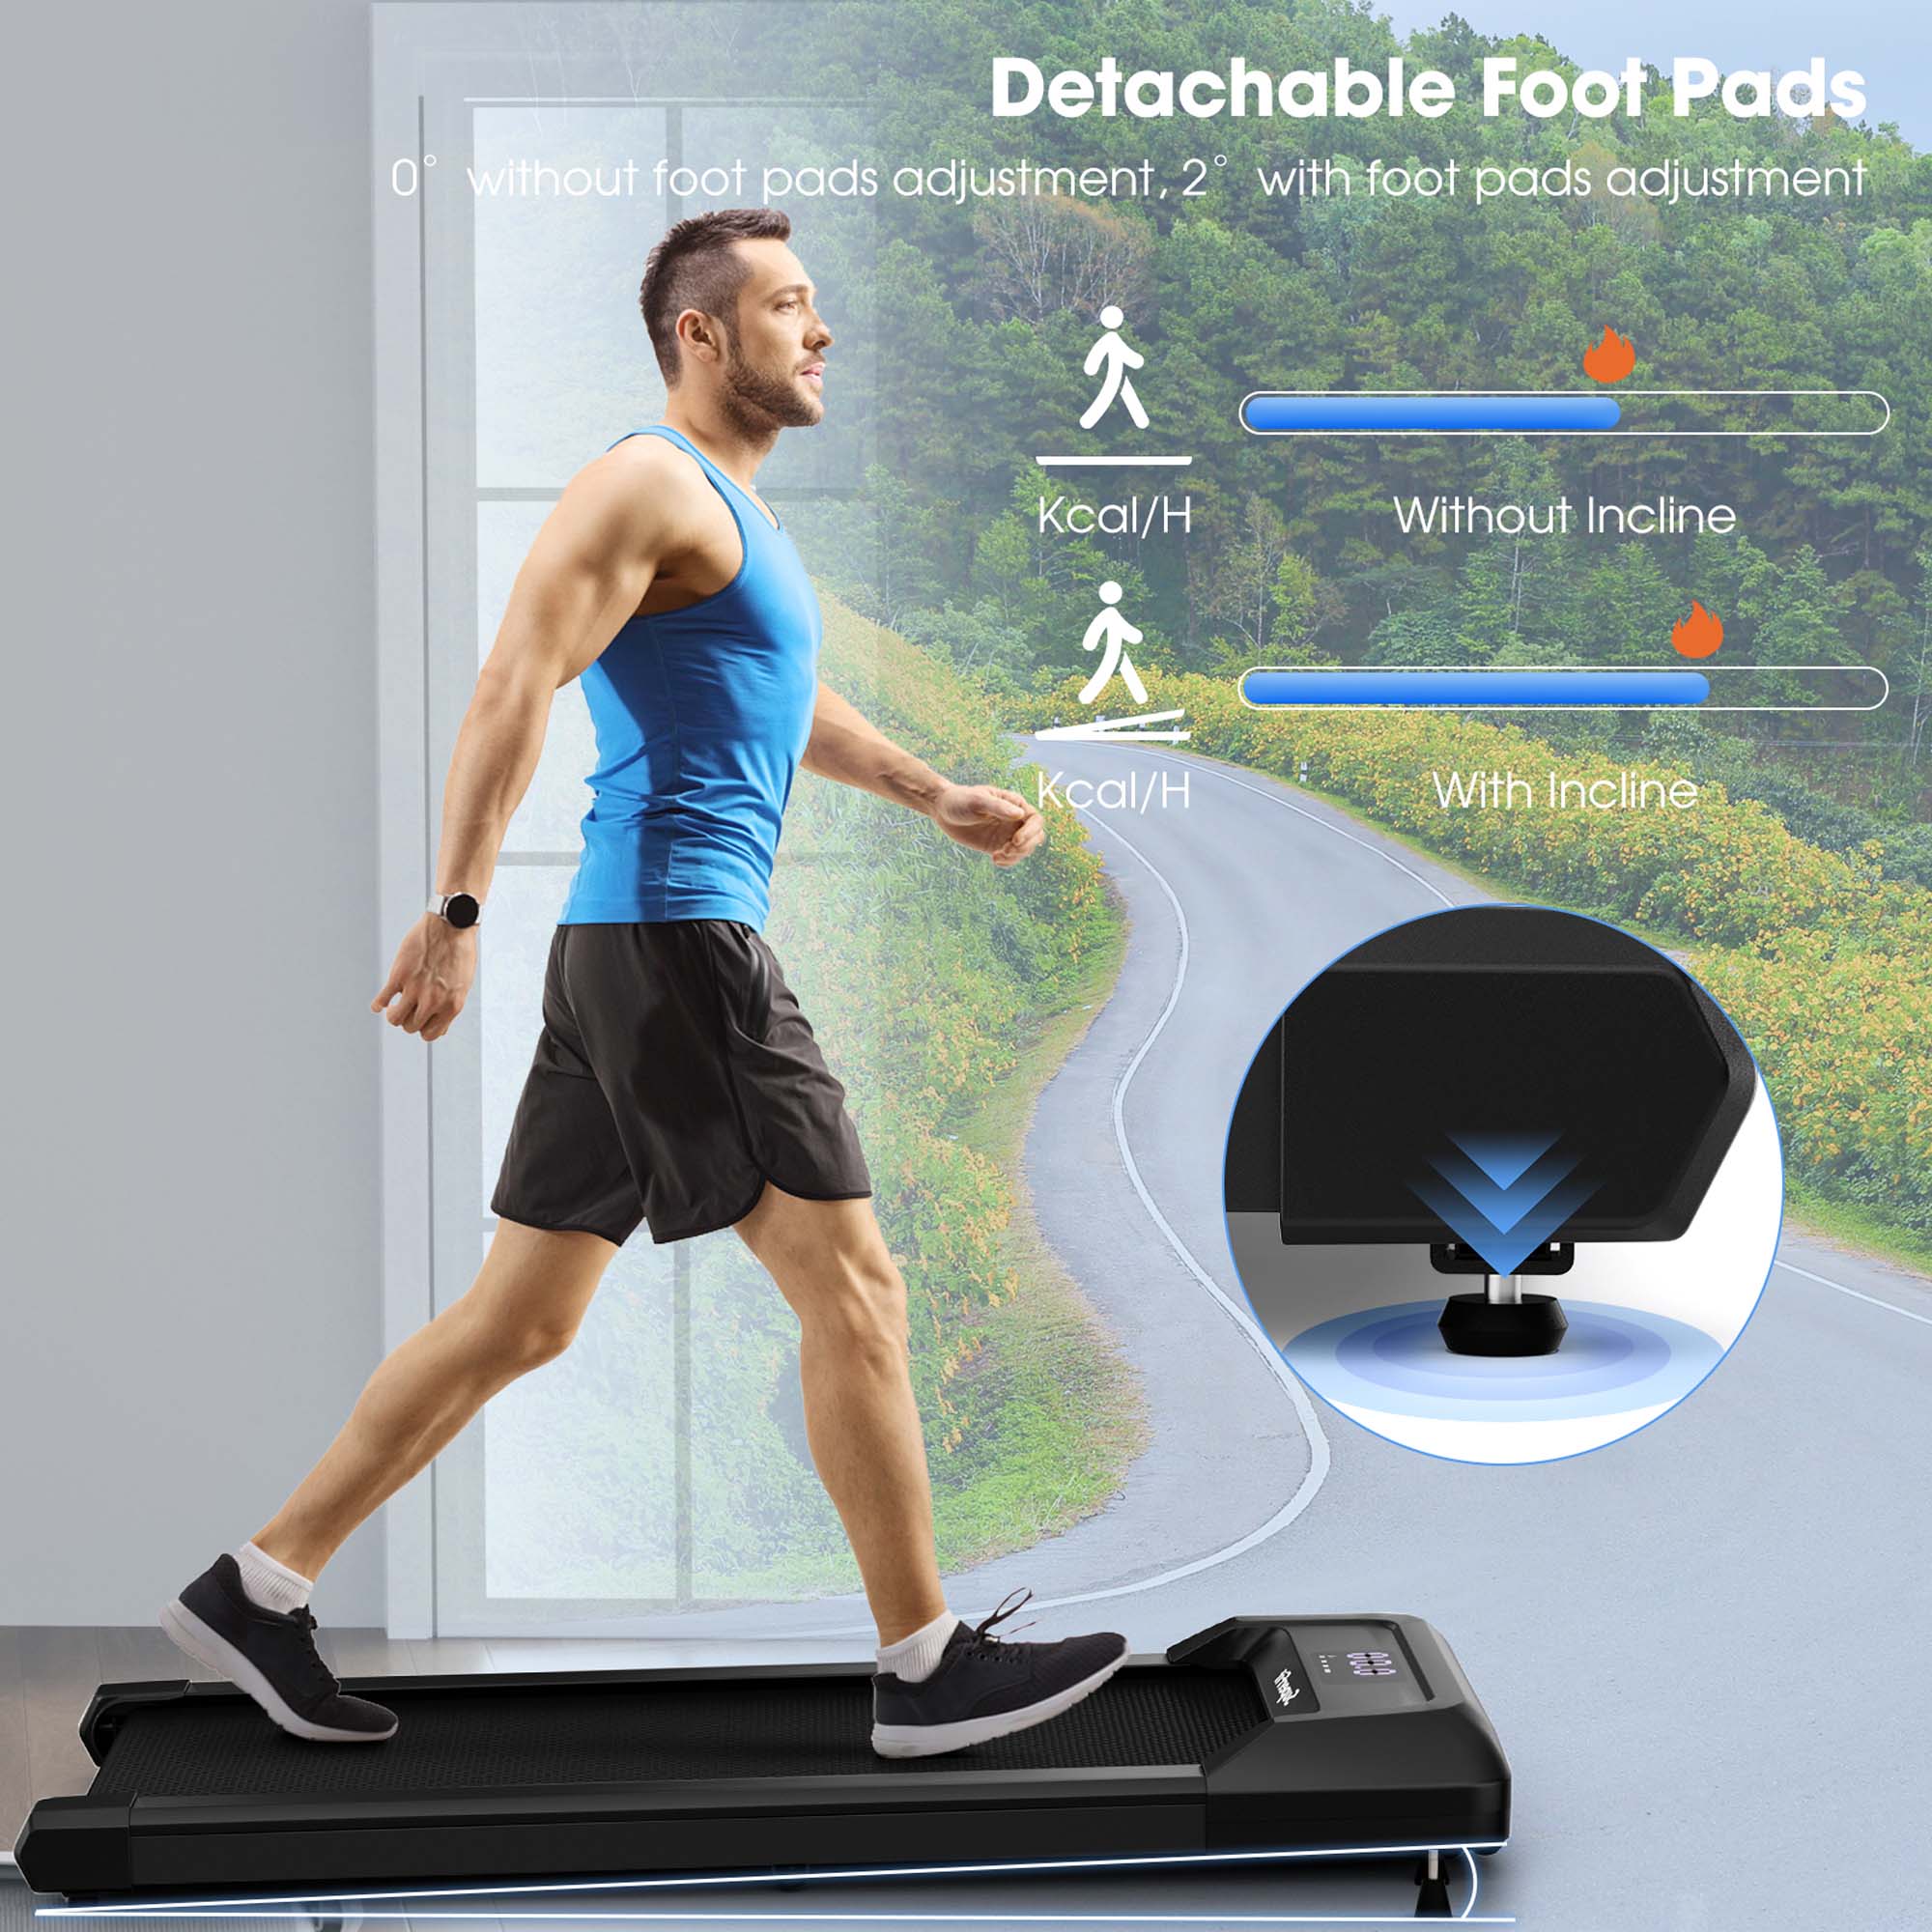 SuperFit 0.6-3.8MPH Walking Pad Under Desk Treadmill with Remote Control and LED Display Black - image 5 of 10